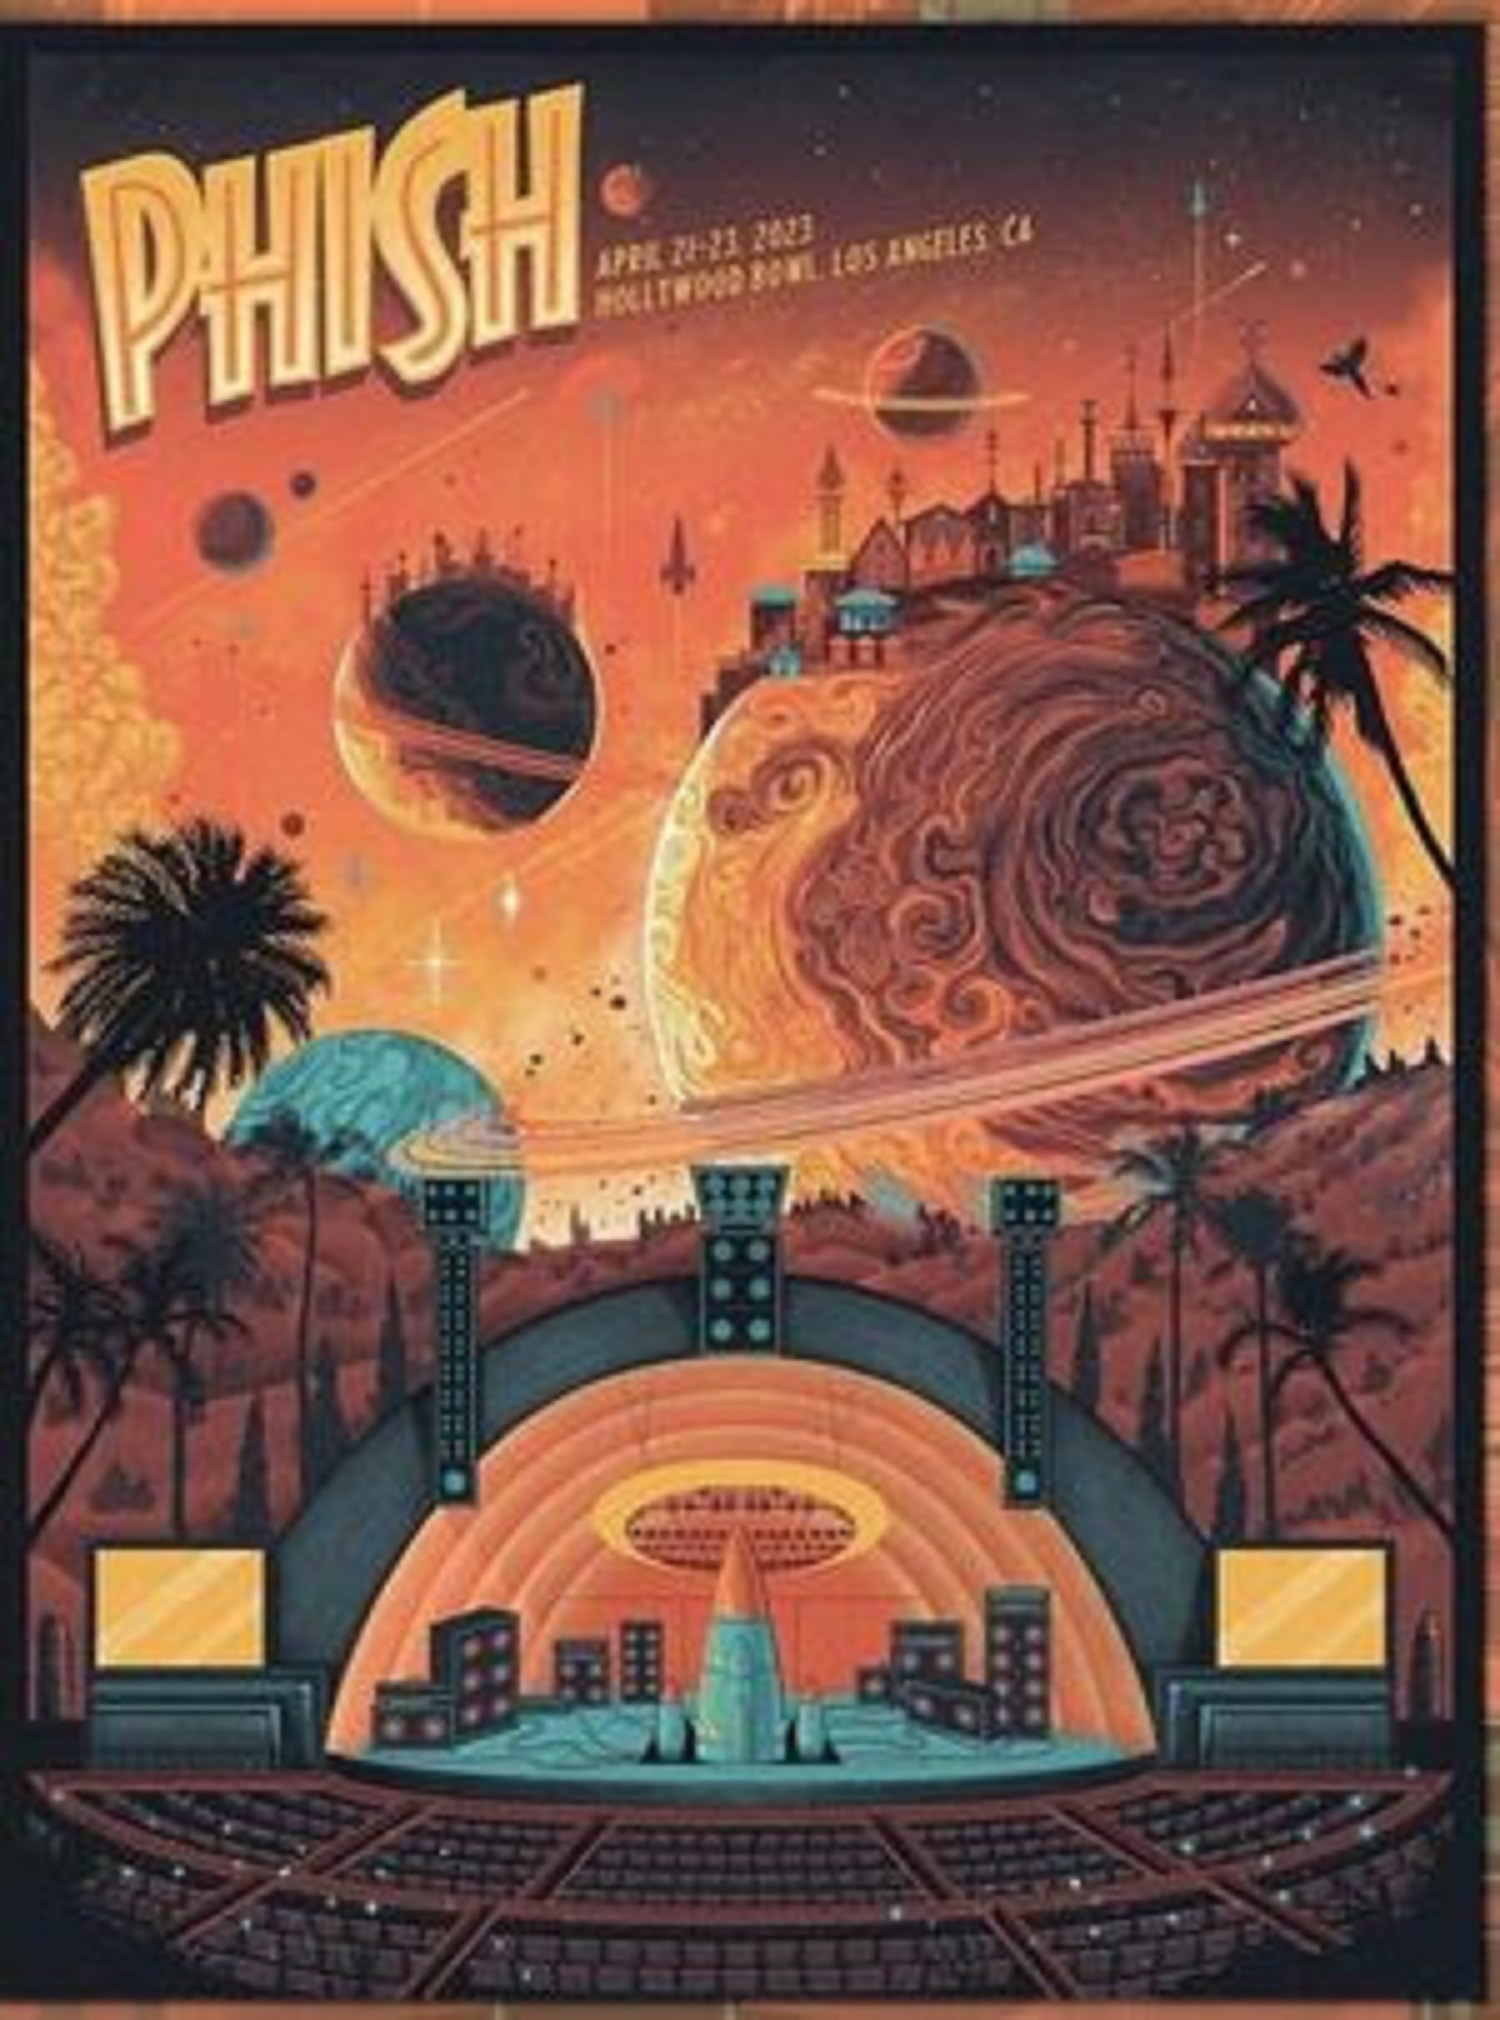 2023 Phish Signed Poster Charity Auction Is Back to Active and Ends Tonight! (Monday, November 20)